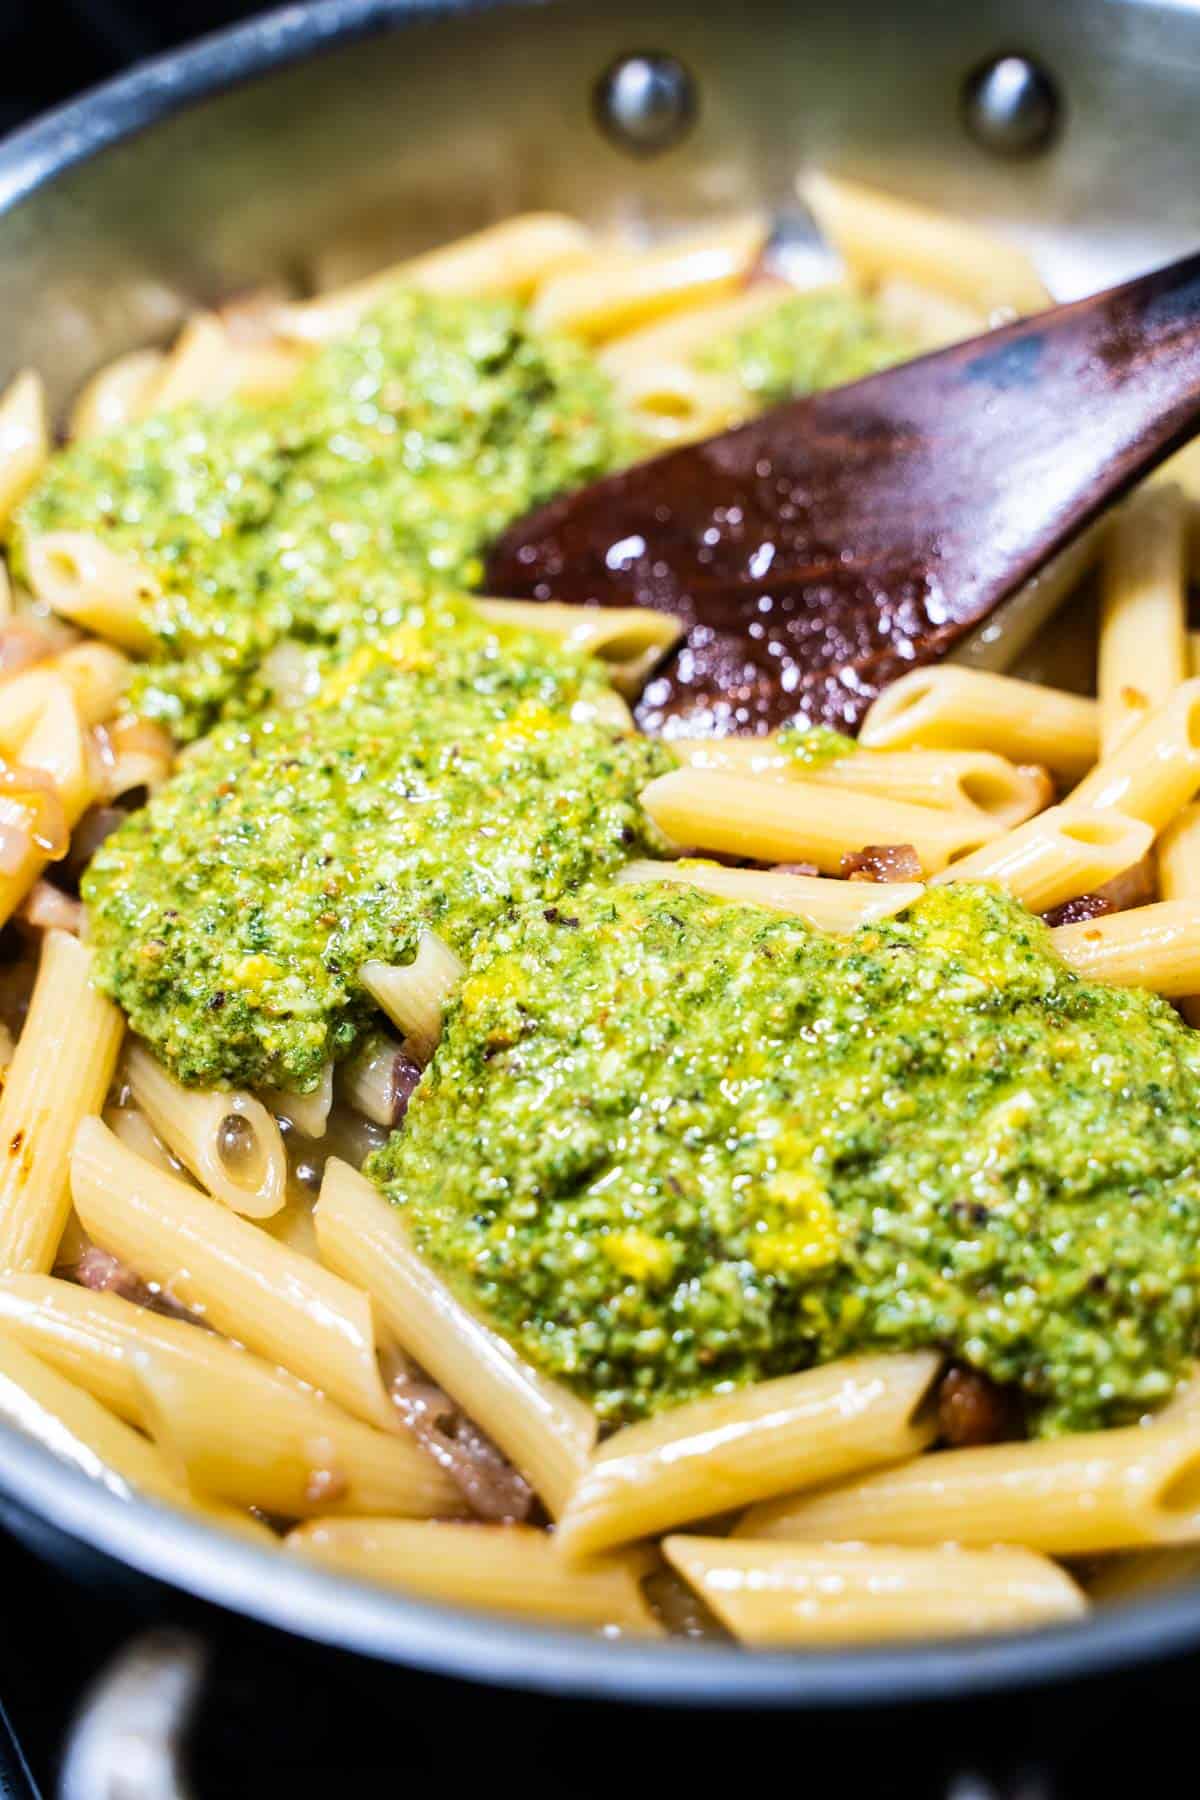 PIstachio pesto on top of penne pasta in a skillet with a wooden spoon